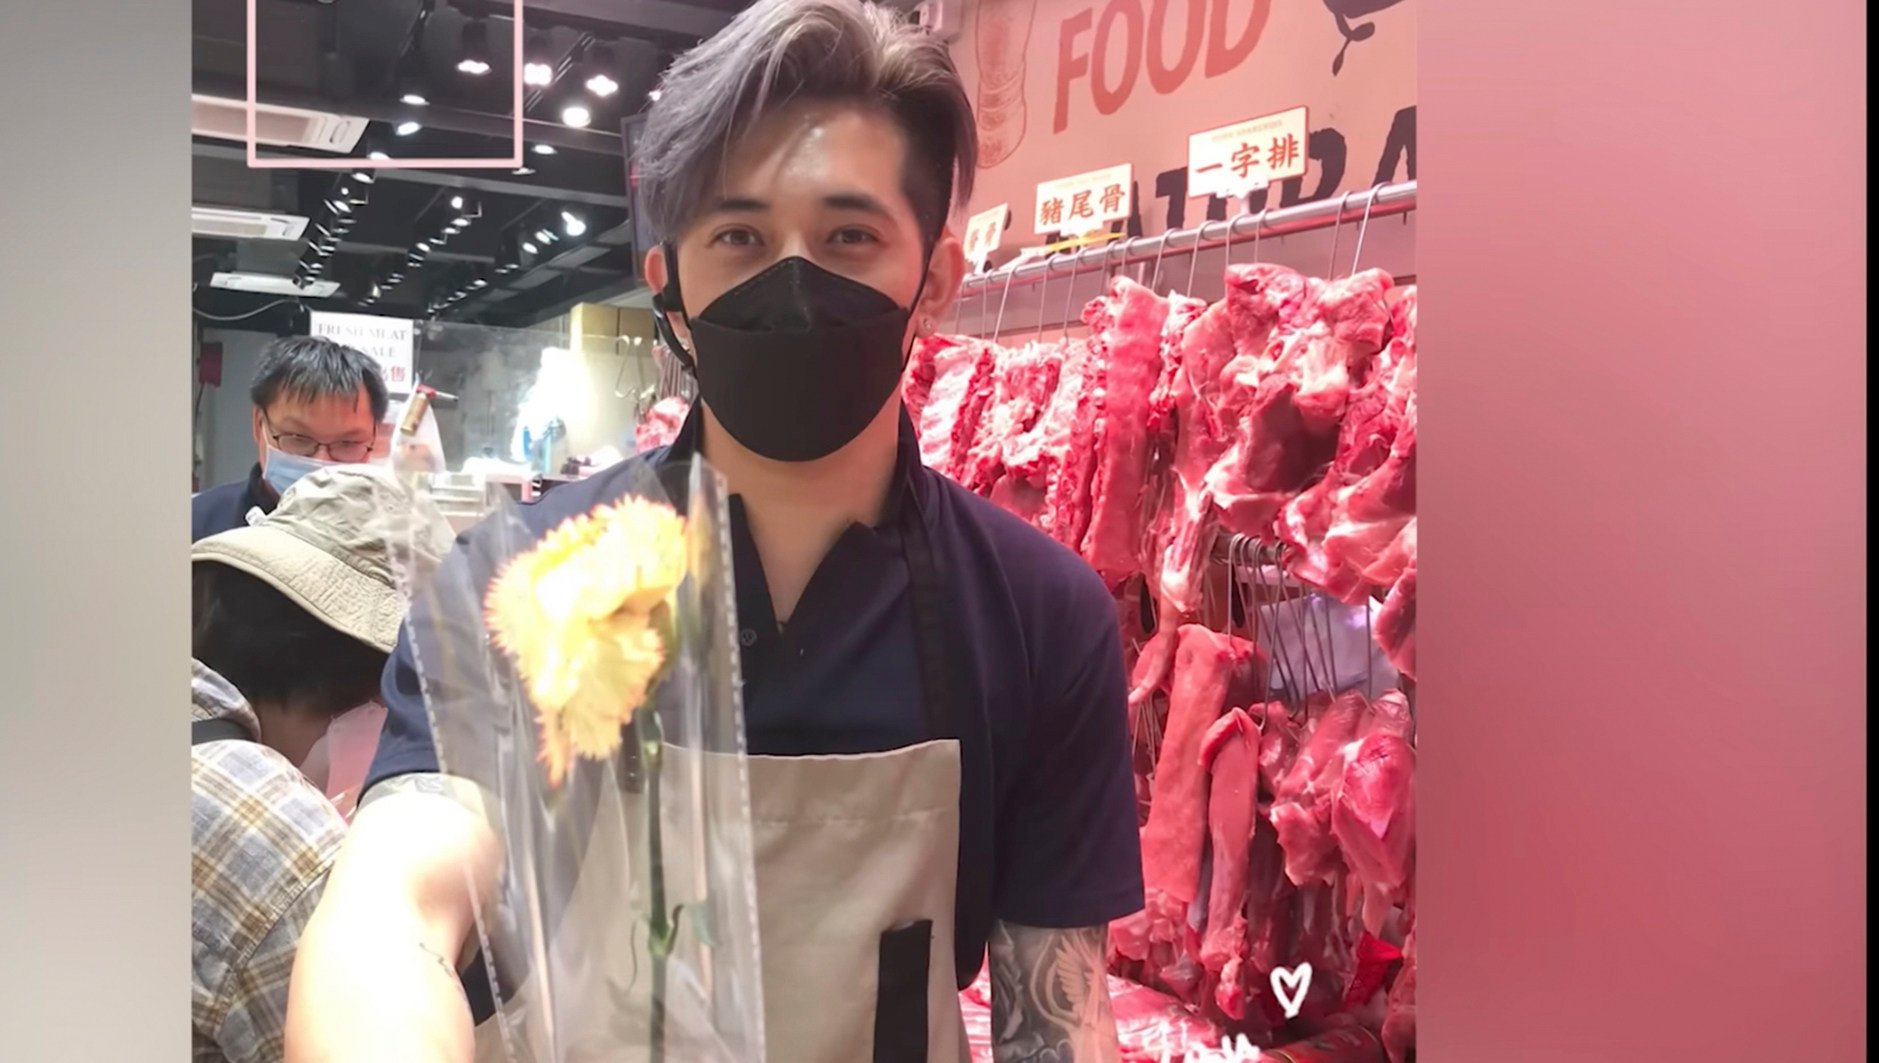 Samuel Lau Sung-wai, a butcher at a shop in Hong Kong’s New Territories, in a still from his YouTube channel. Photo: YouTube